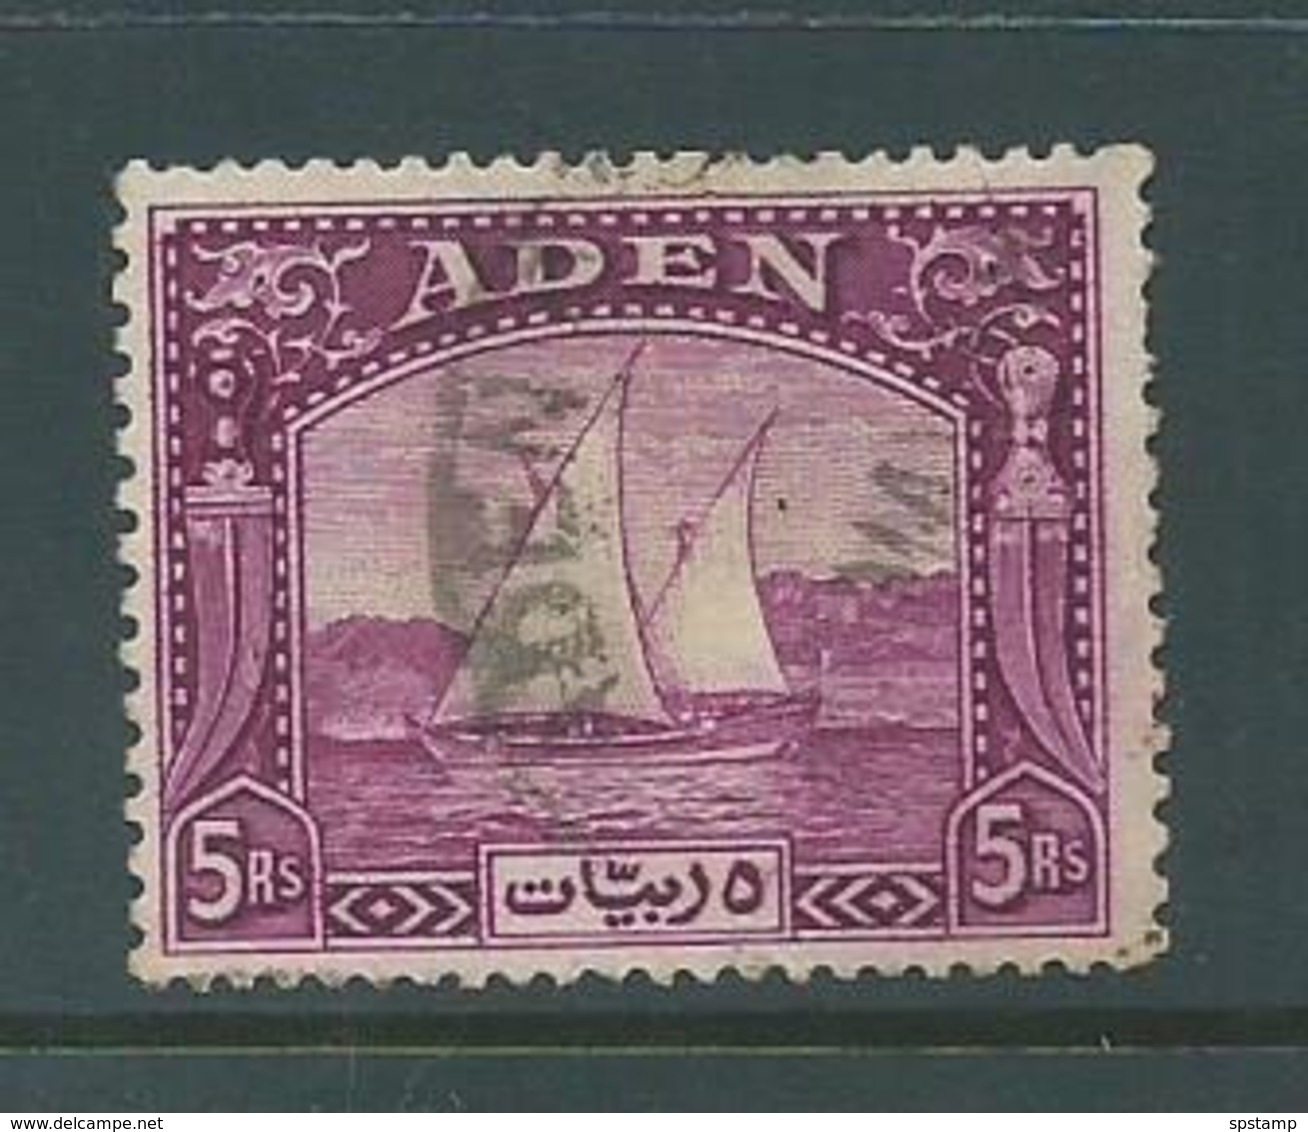 Aden 1937 Dhows 5 Rupee Violet Attractive U , Rich Colour , Couple Slightly Nibbed Perfs , Small Tear 1 Perf At Top - Aden (1854-1963)